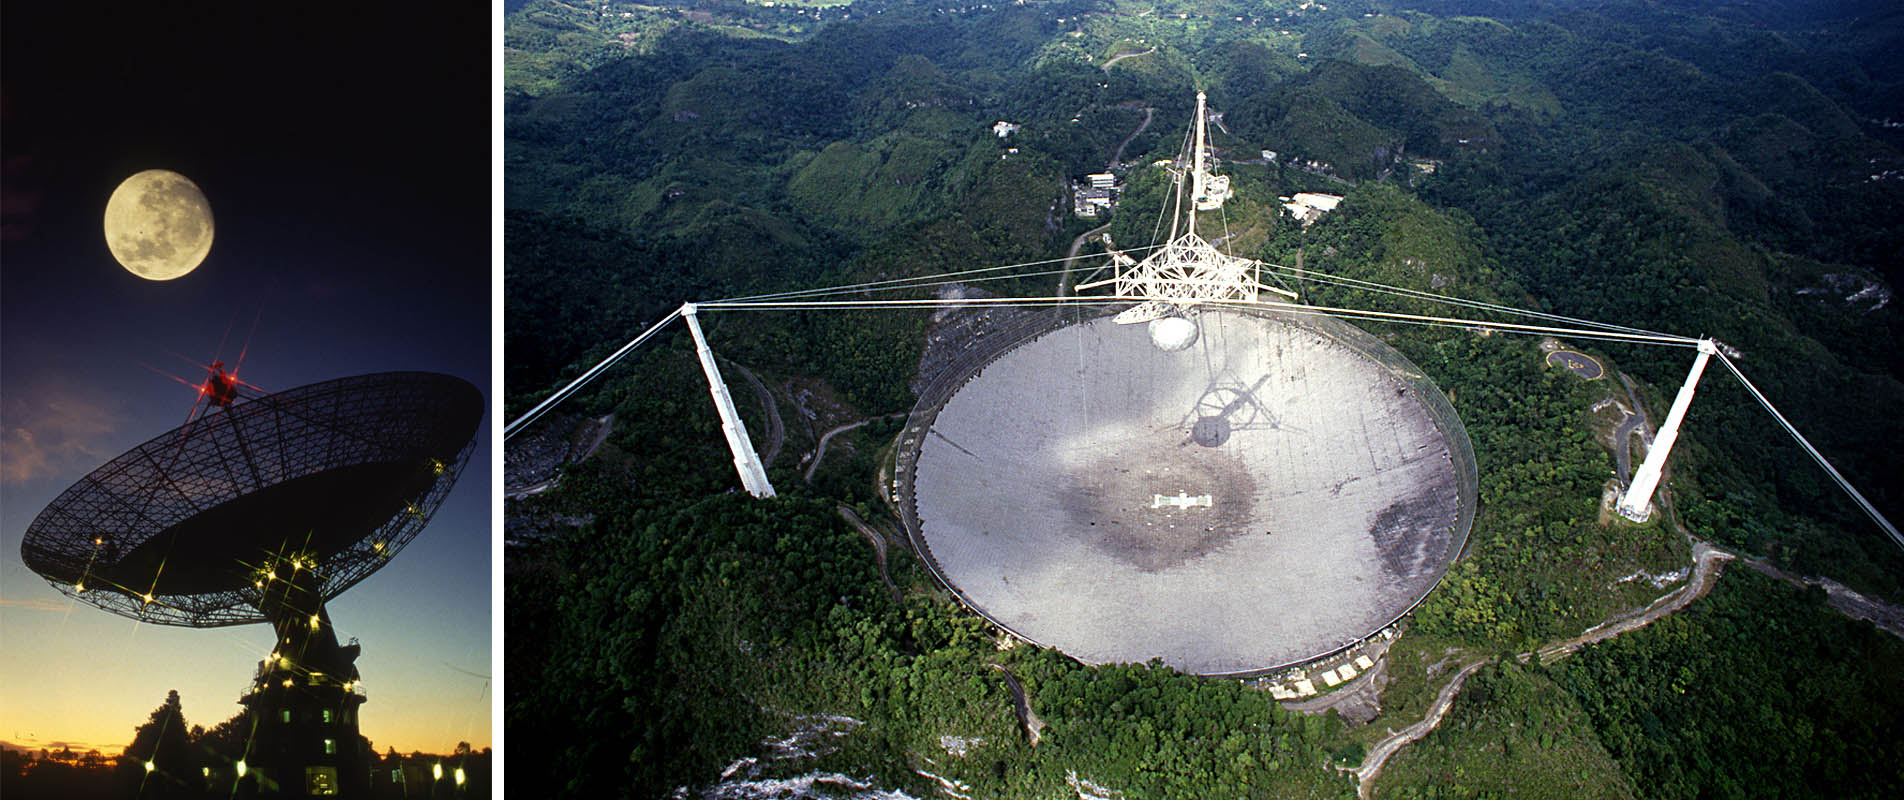 The 64-meter Parkes antenna and Arecibo antenna in Puerto Rico